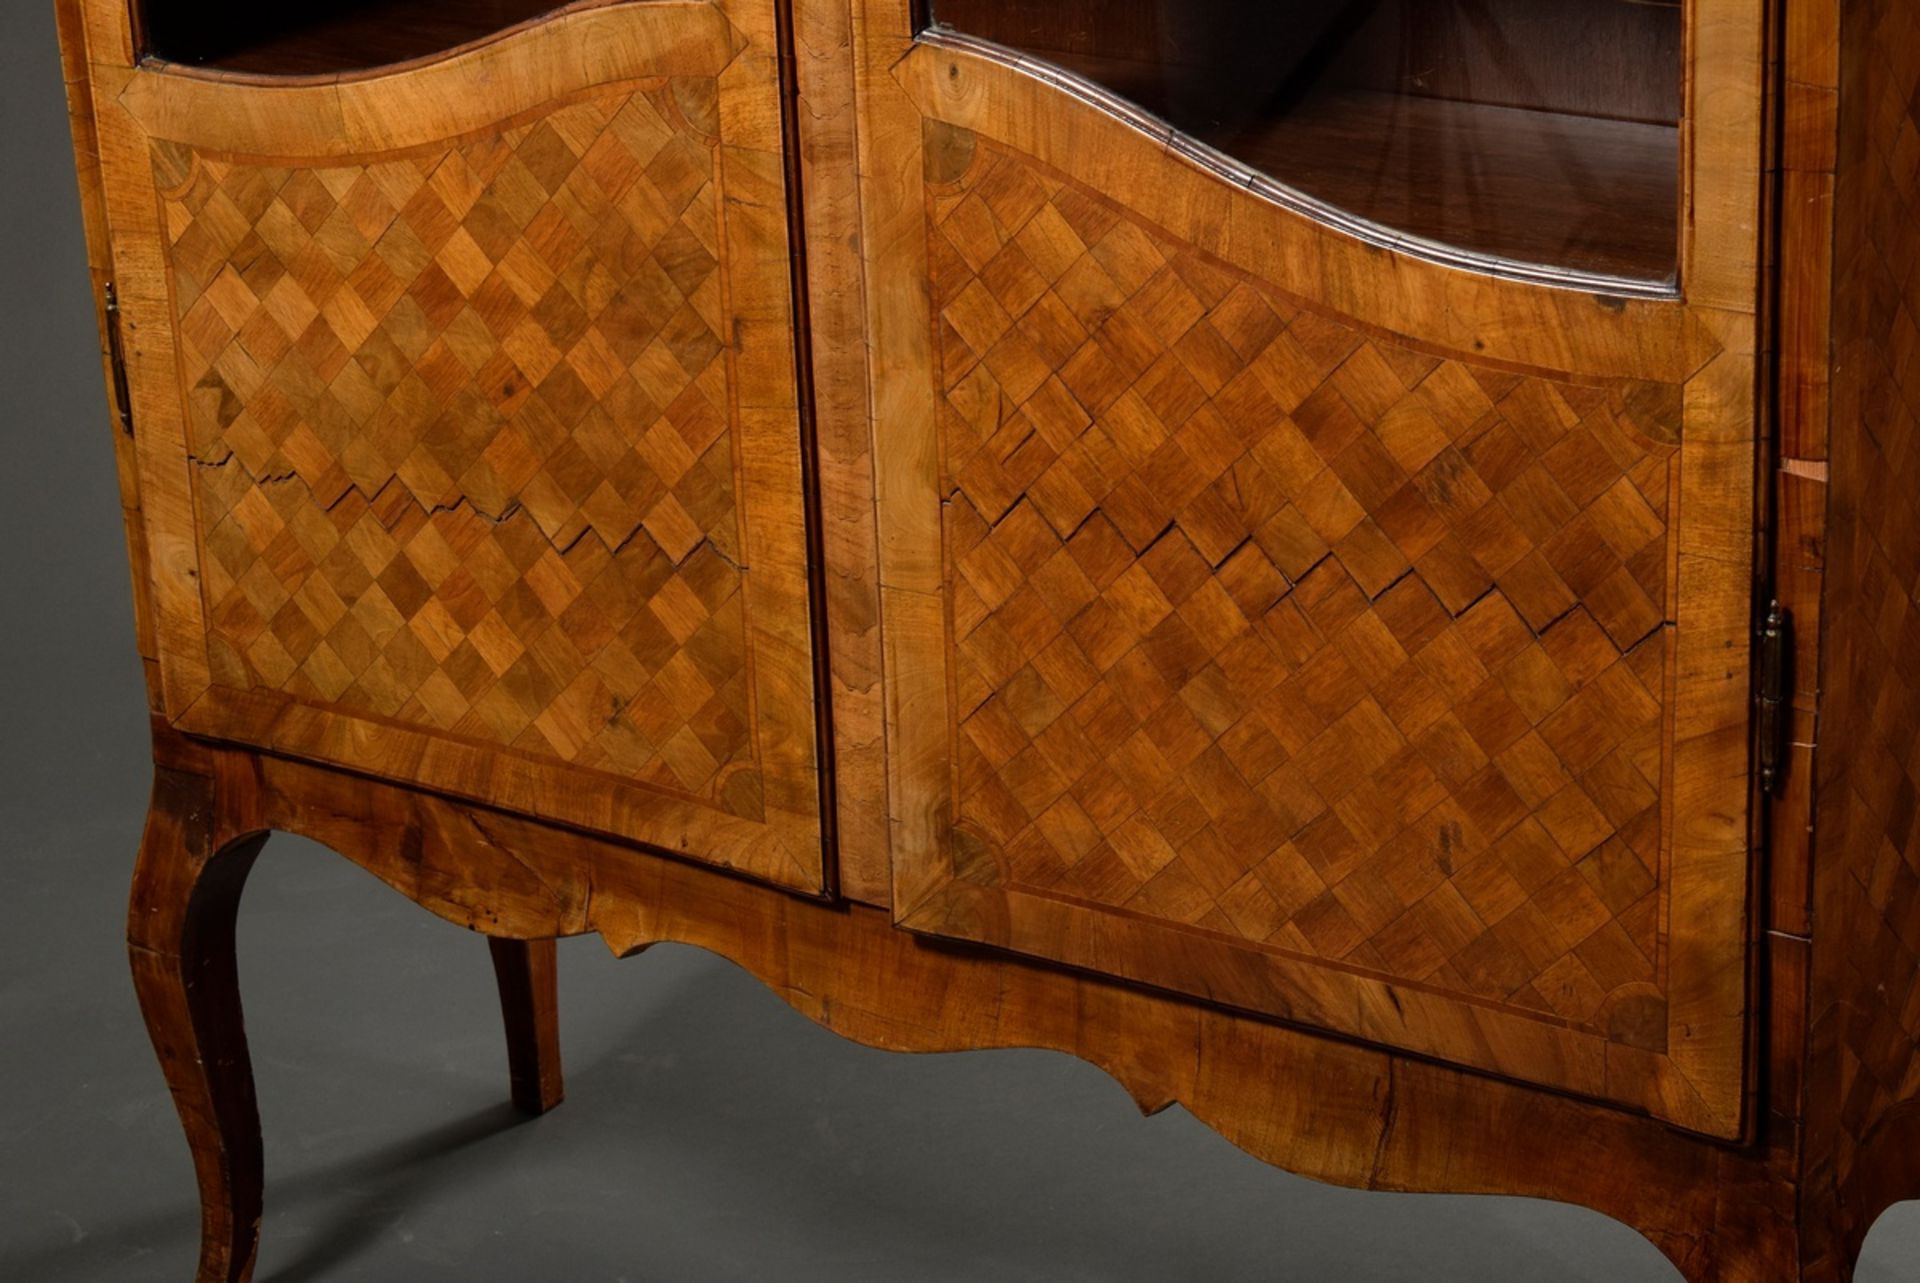 Showcase on curved legs in rococo style with cube marquetry and cranked pediment, walnut veneered o - Image 5 of 11